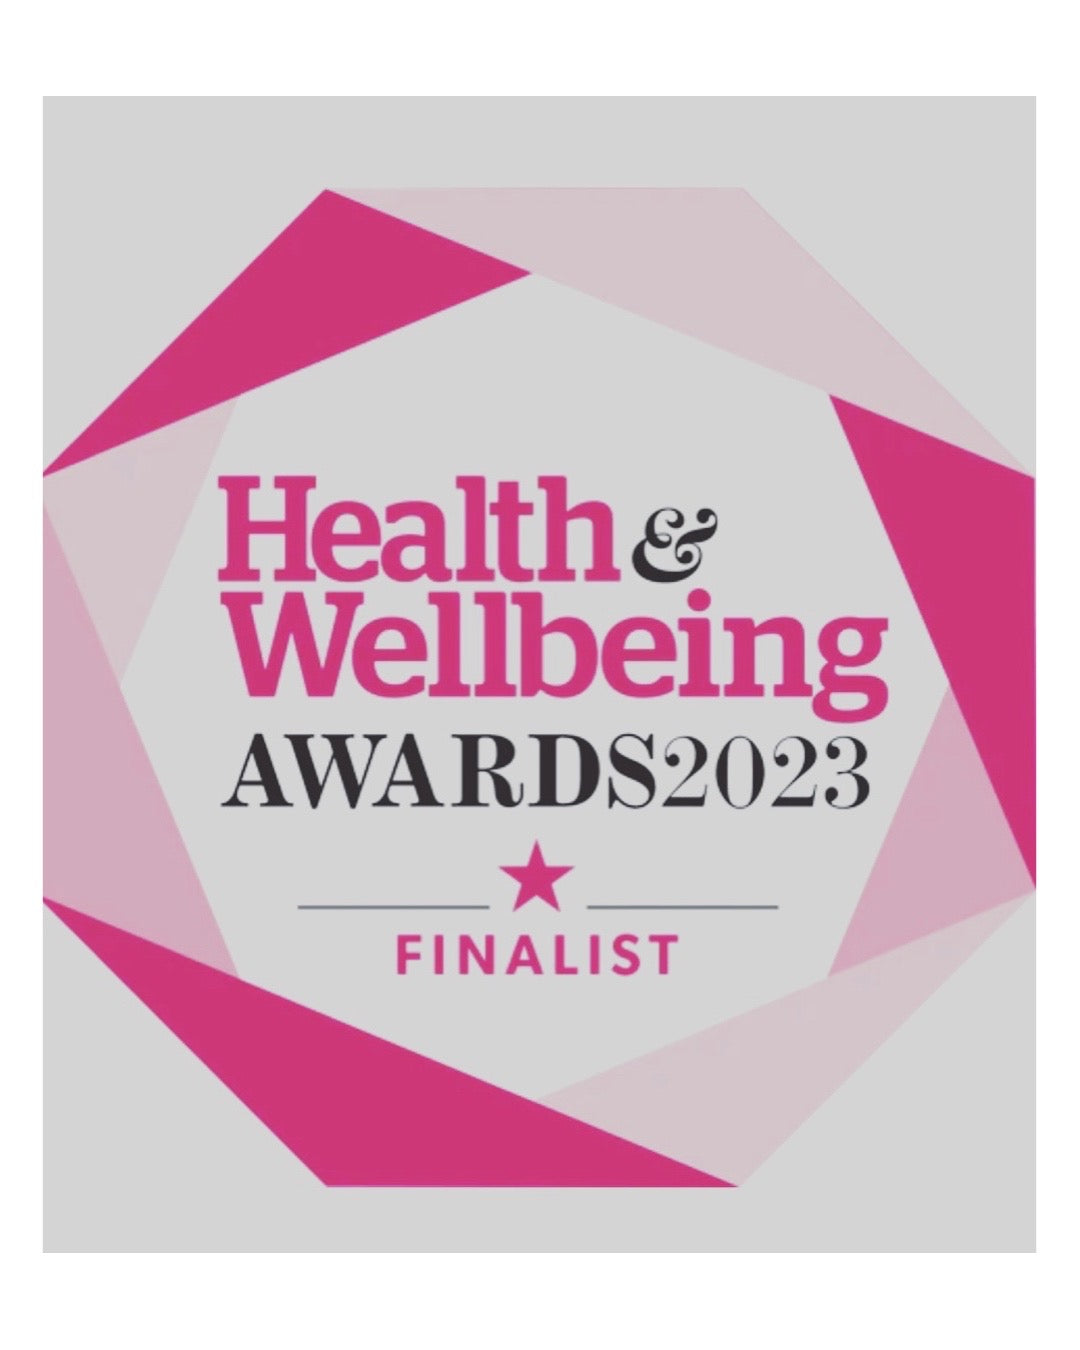 Wellicious has been nominated for the Health Wellbeing Awards 2023!